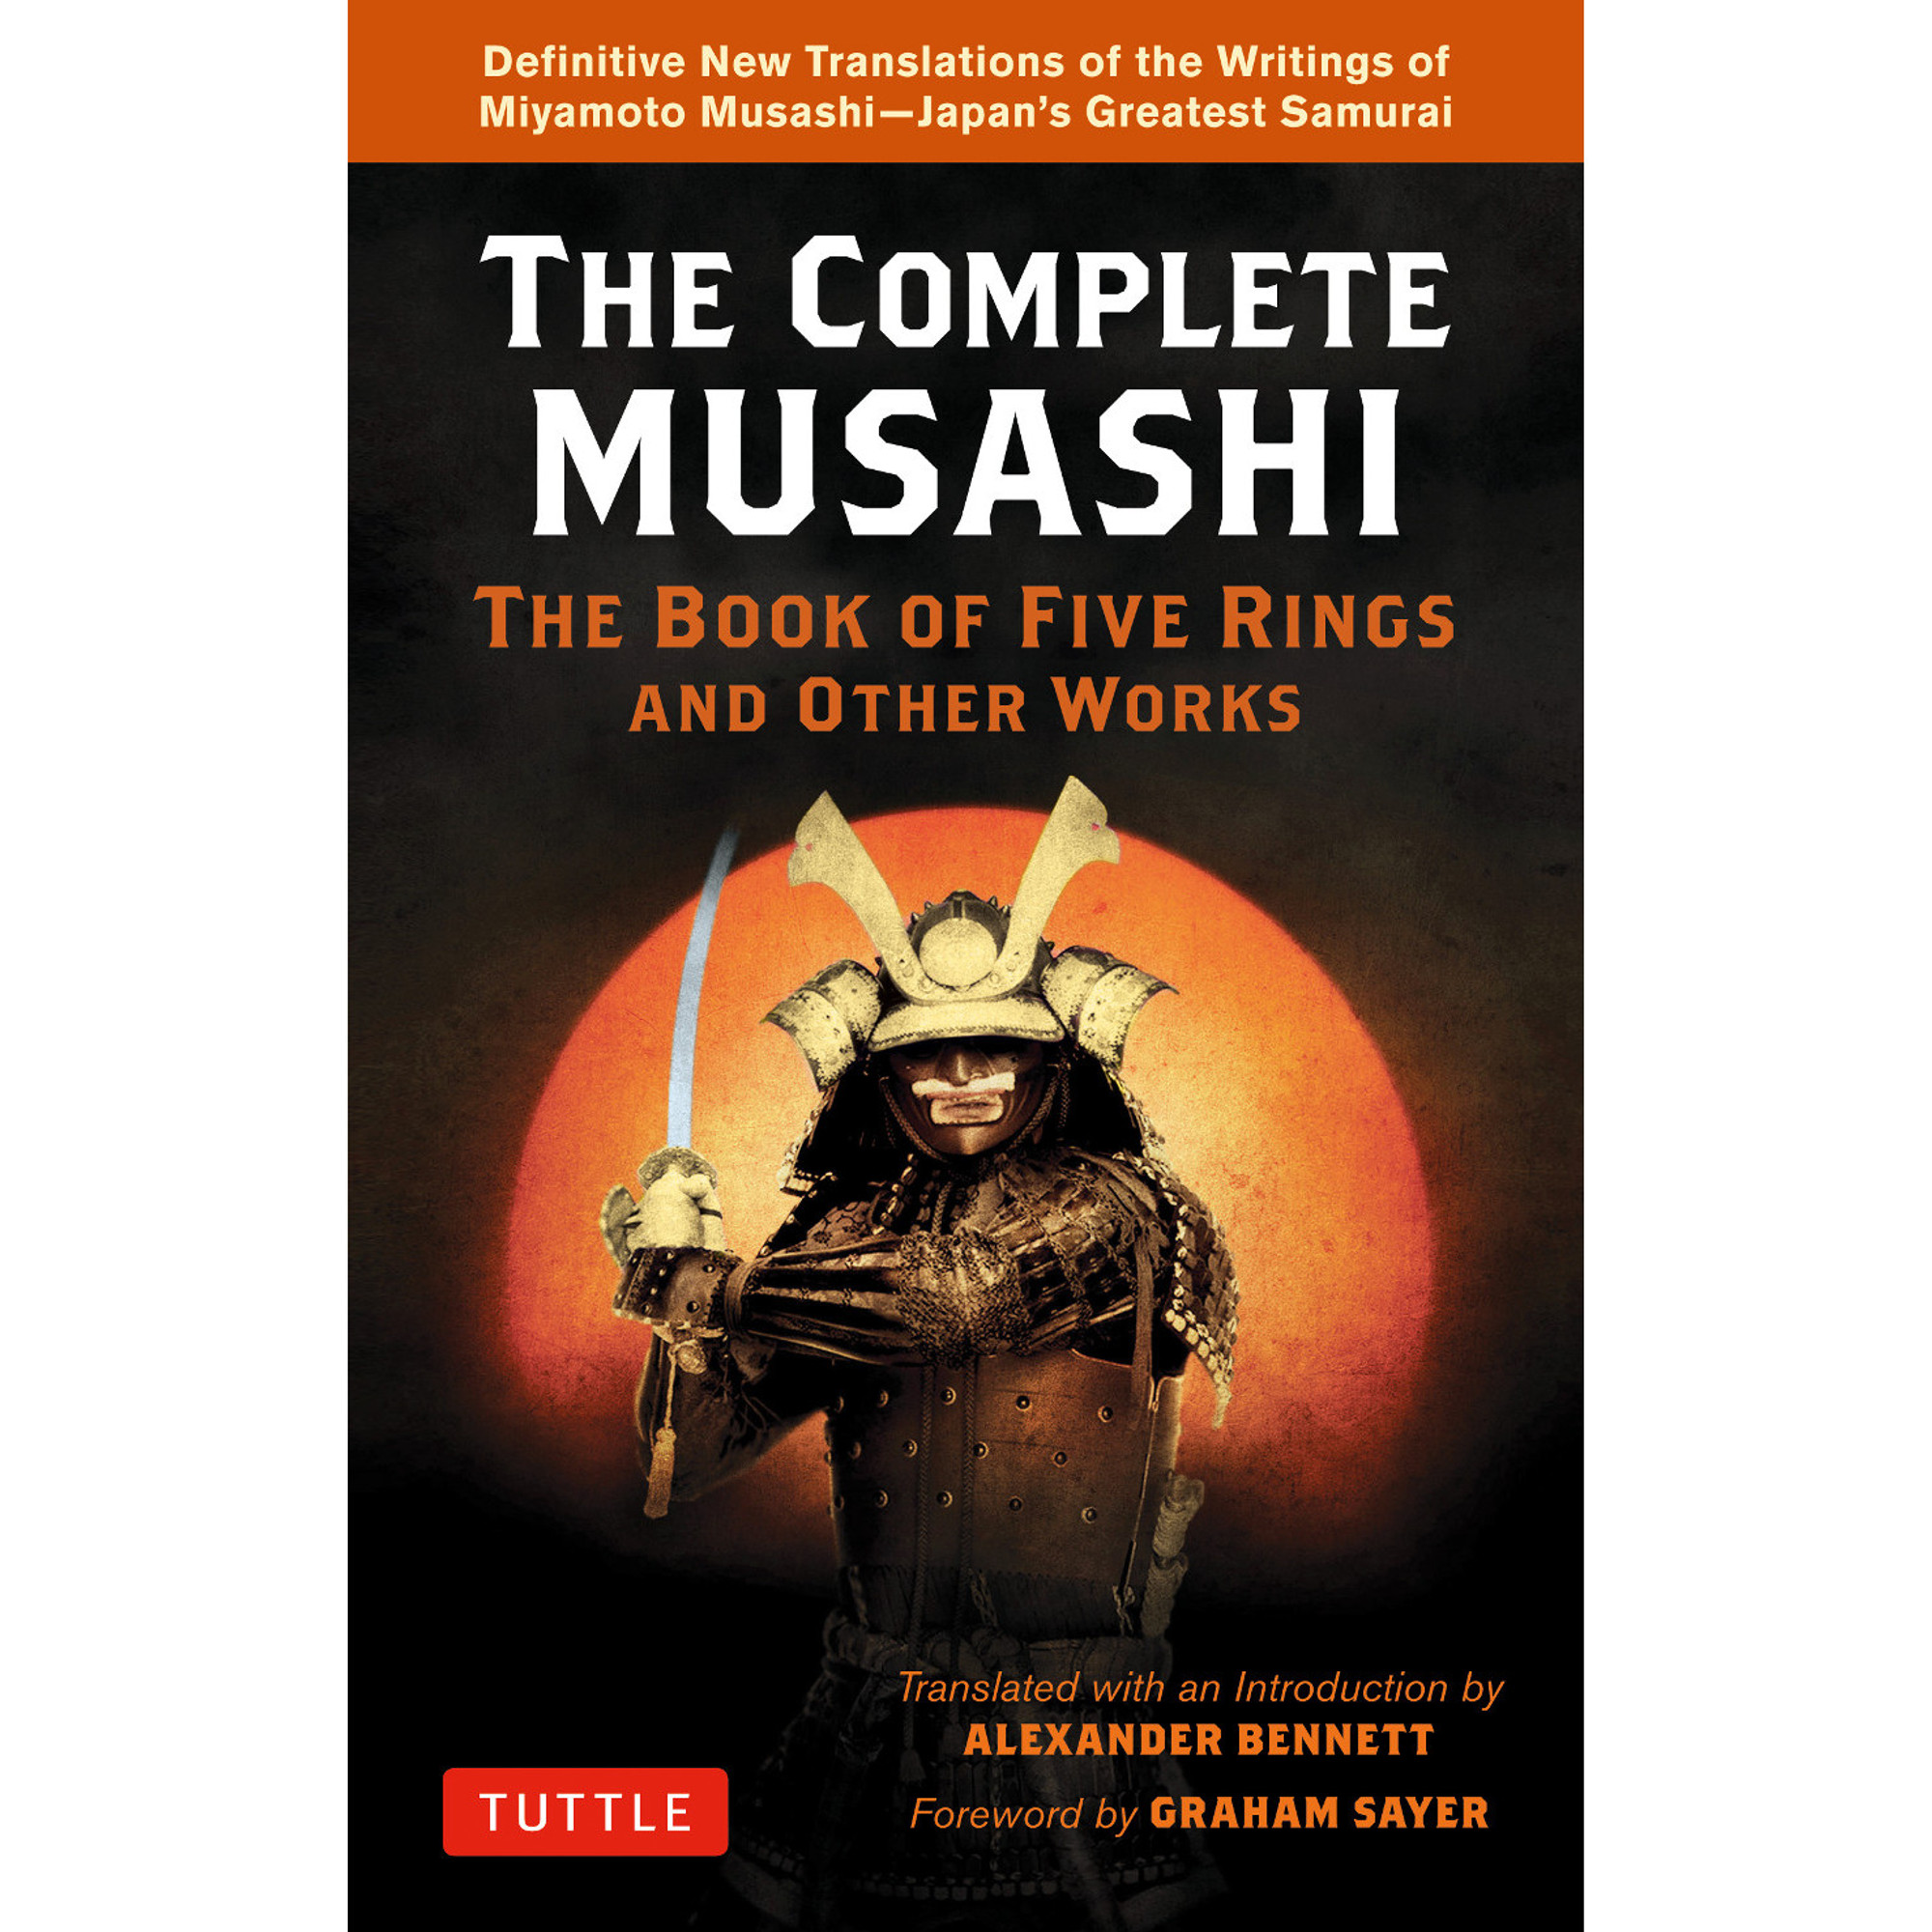 The Complete Musashi: The Book of Five Rings and Other Works (9784805316160)